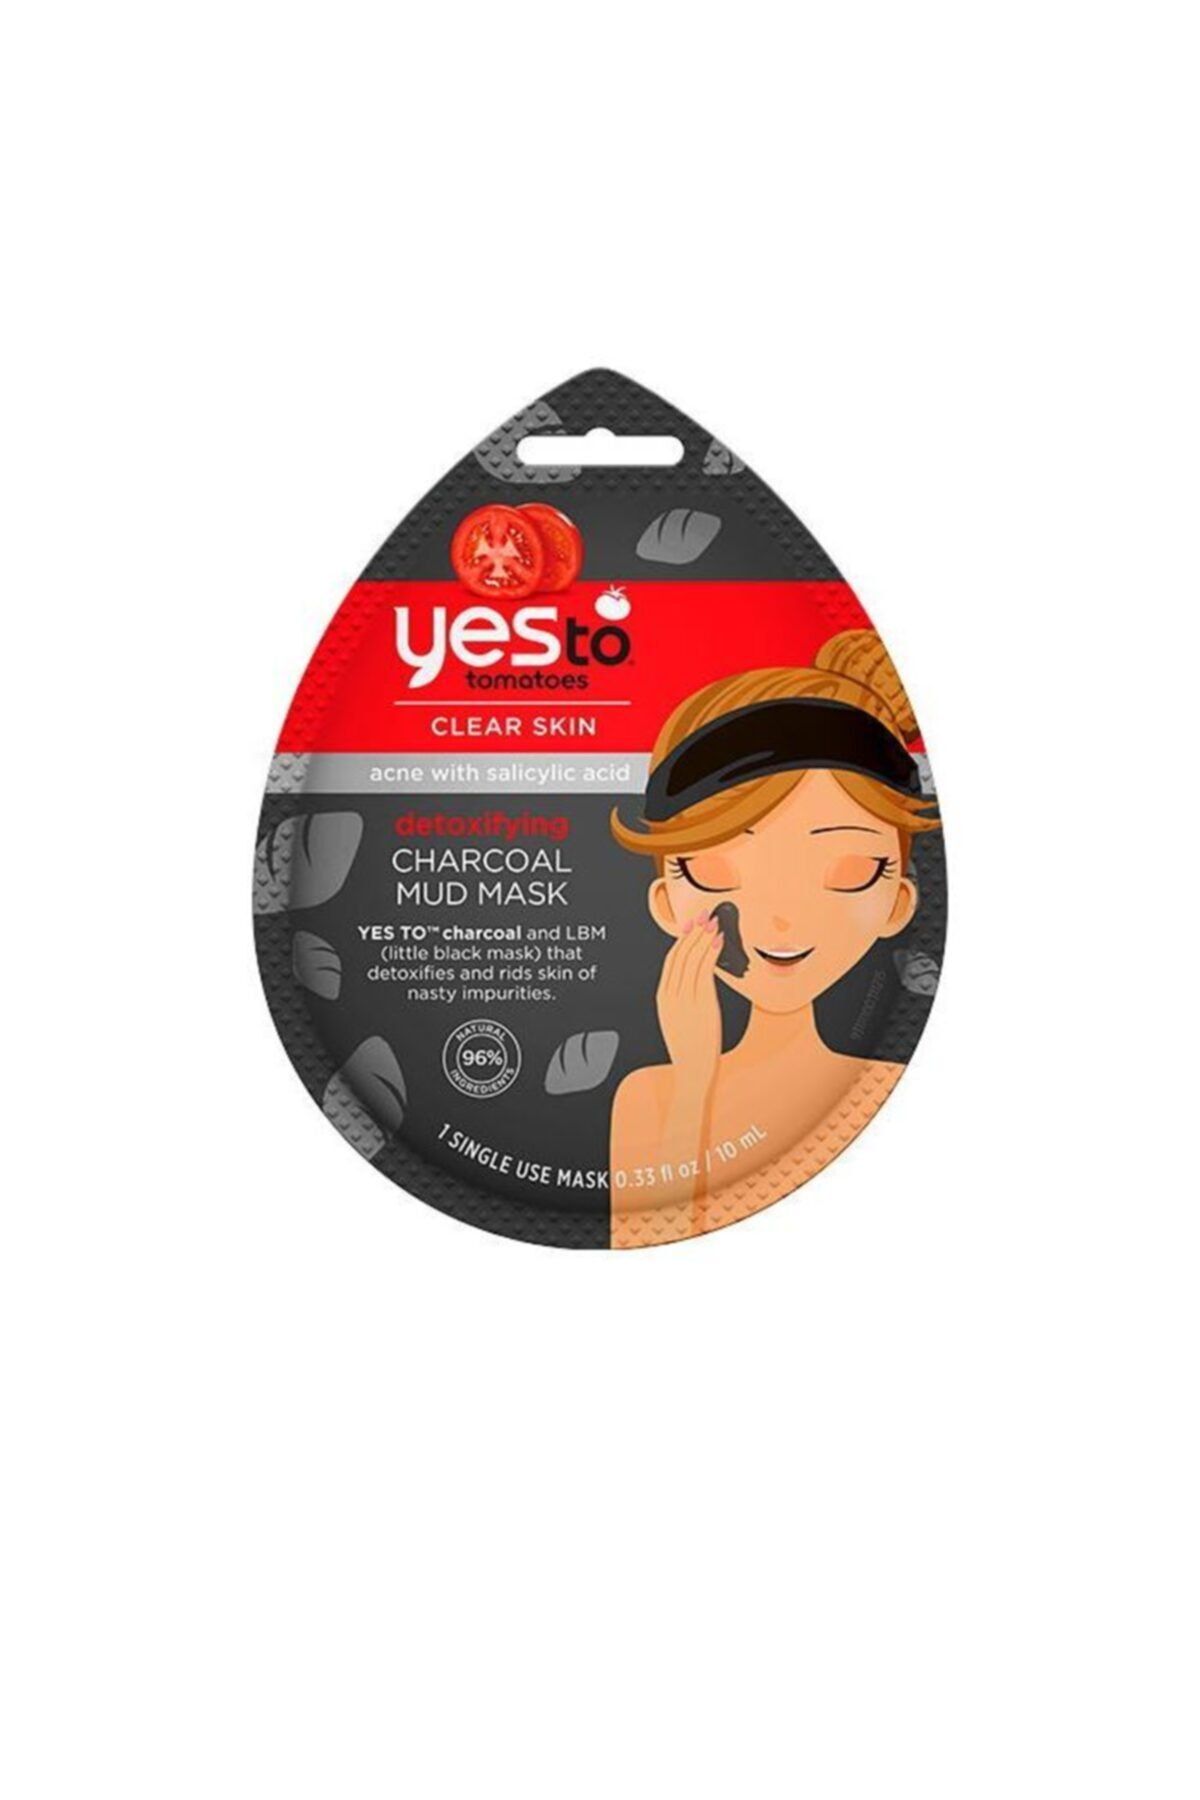 Yes To Tomatoes Charcoal Mud Mask 10ml